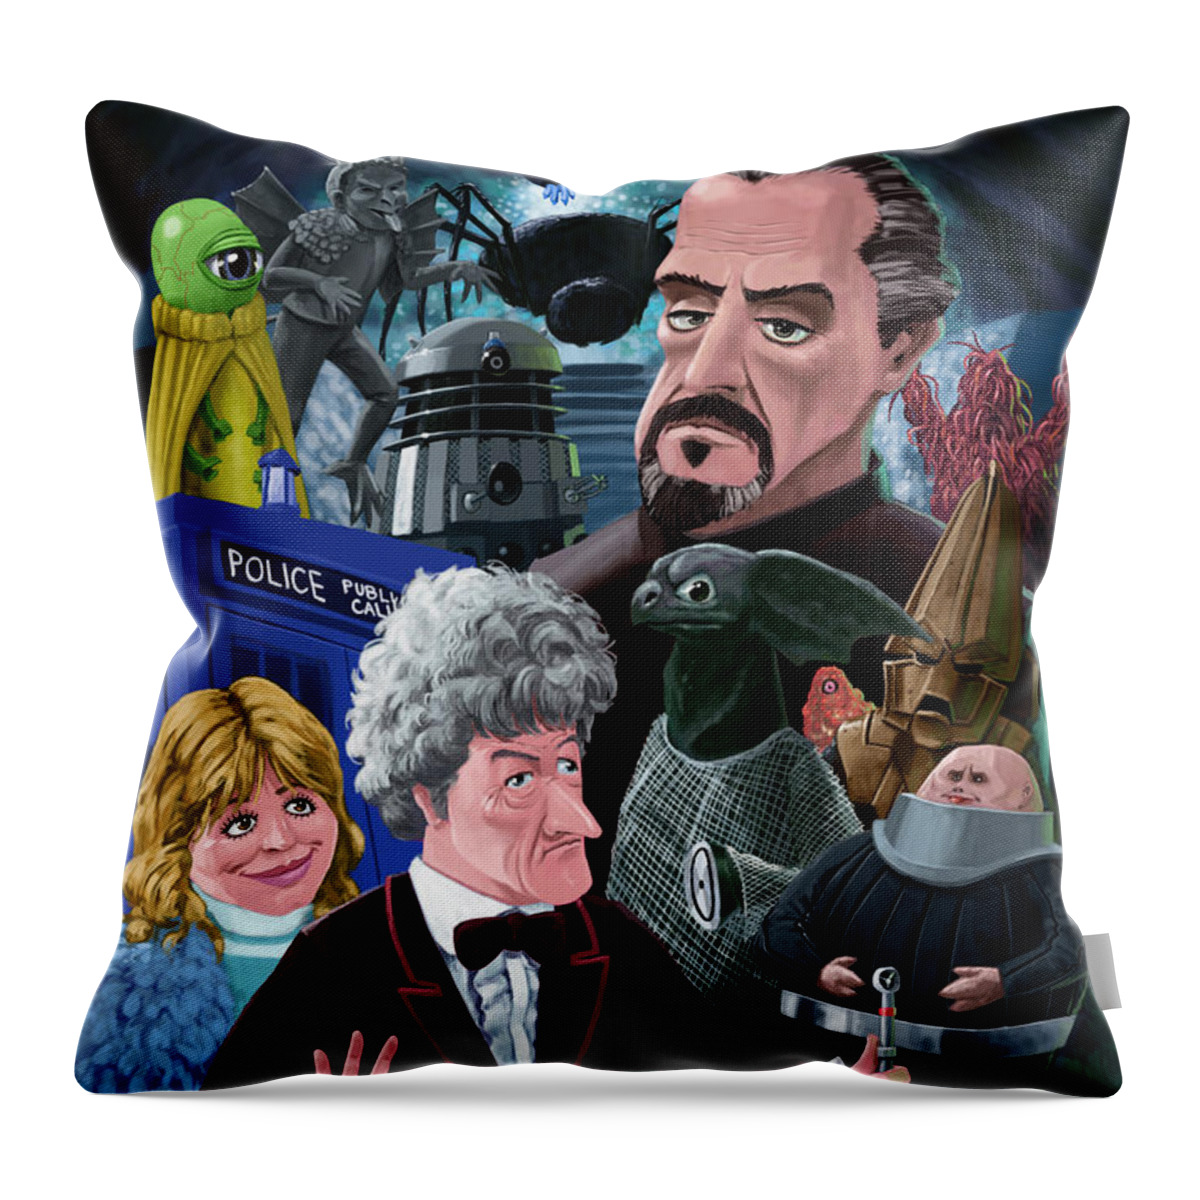 Doctor Who Throw Pillow featuring the digital art 3rd Dr Who and Friends by Martin Davey